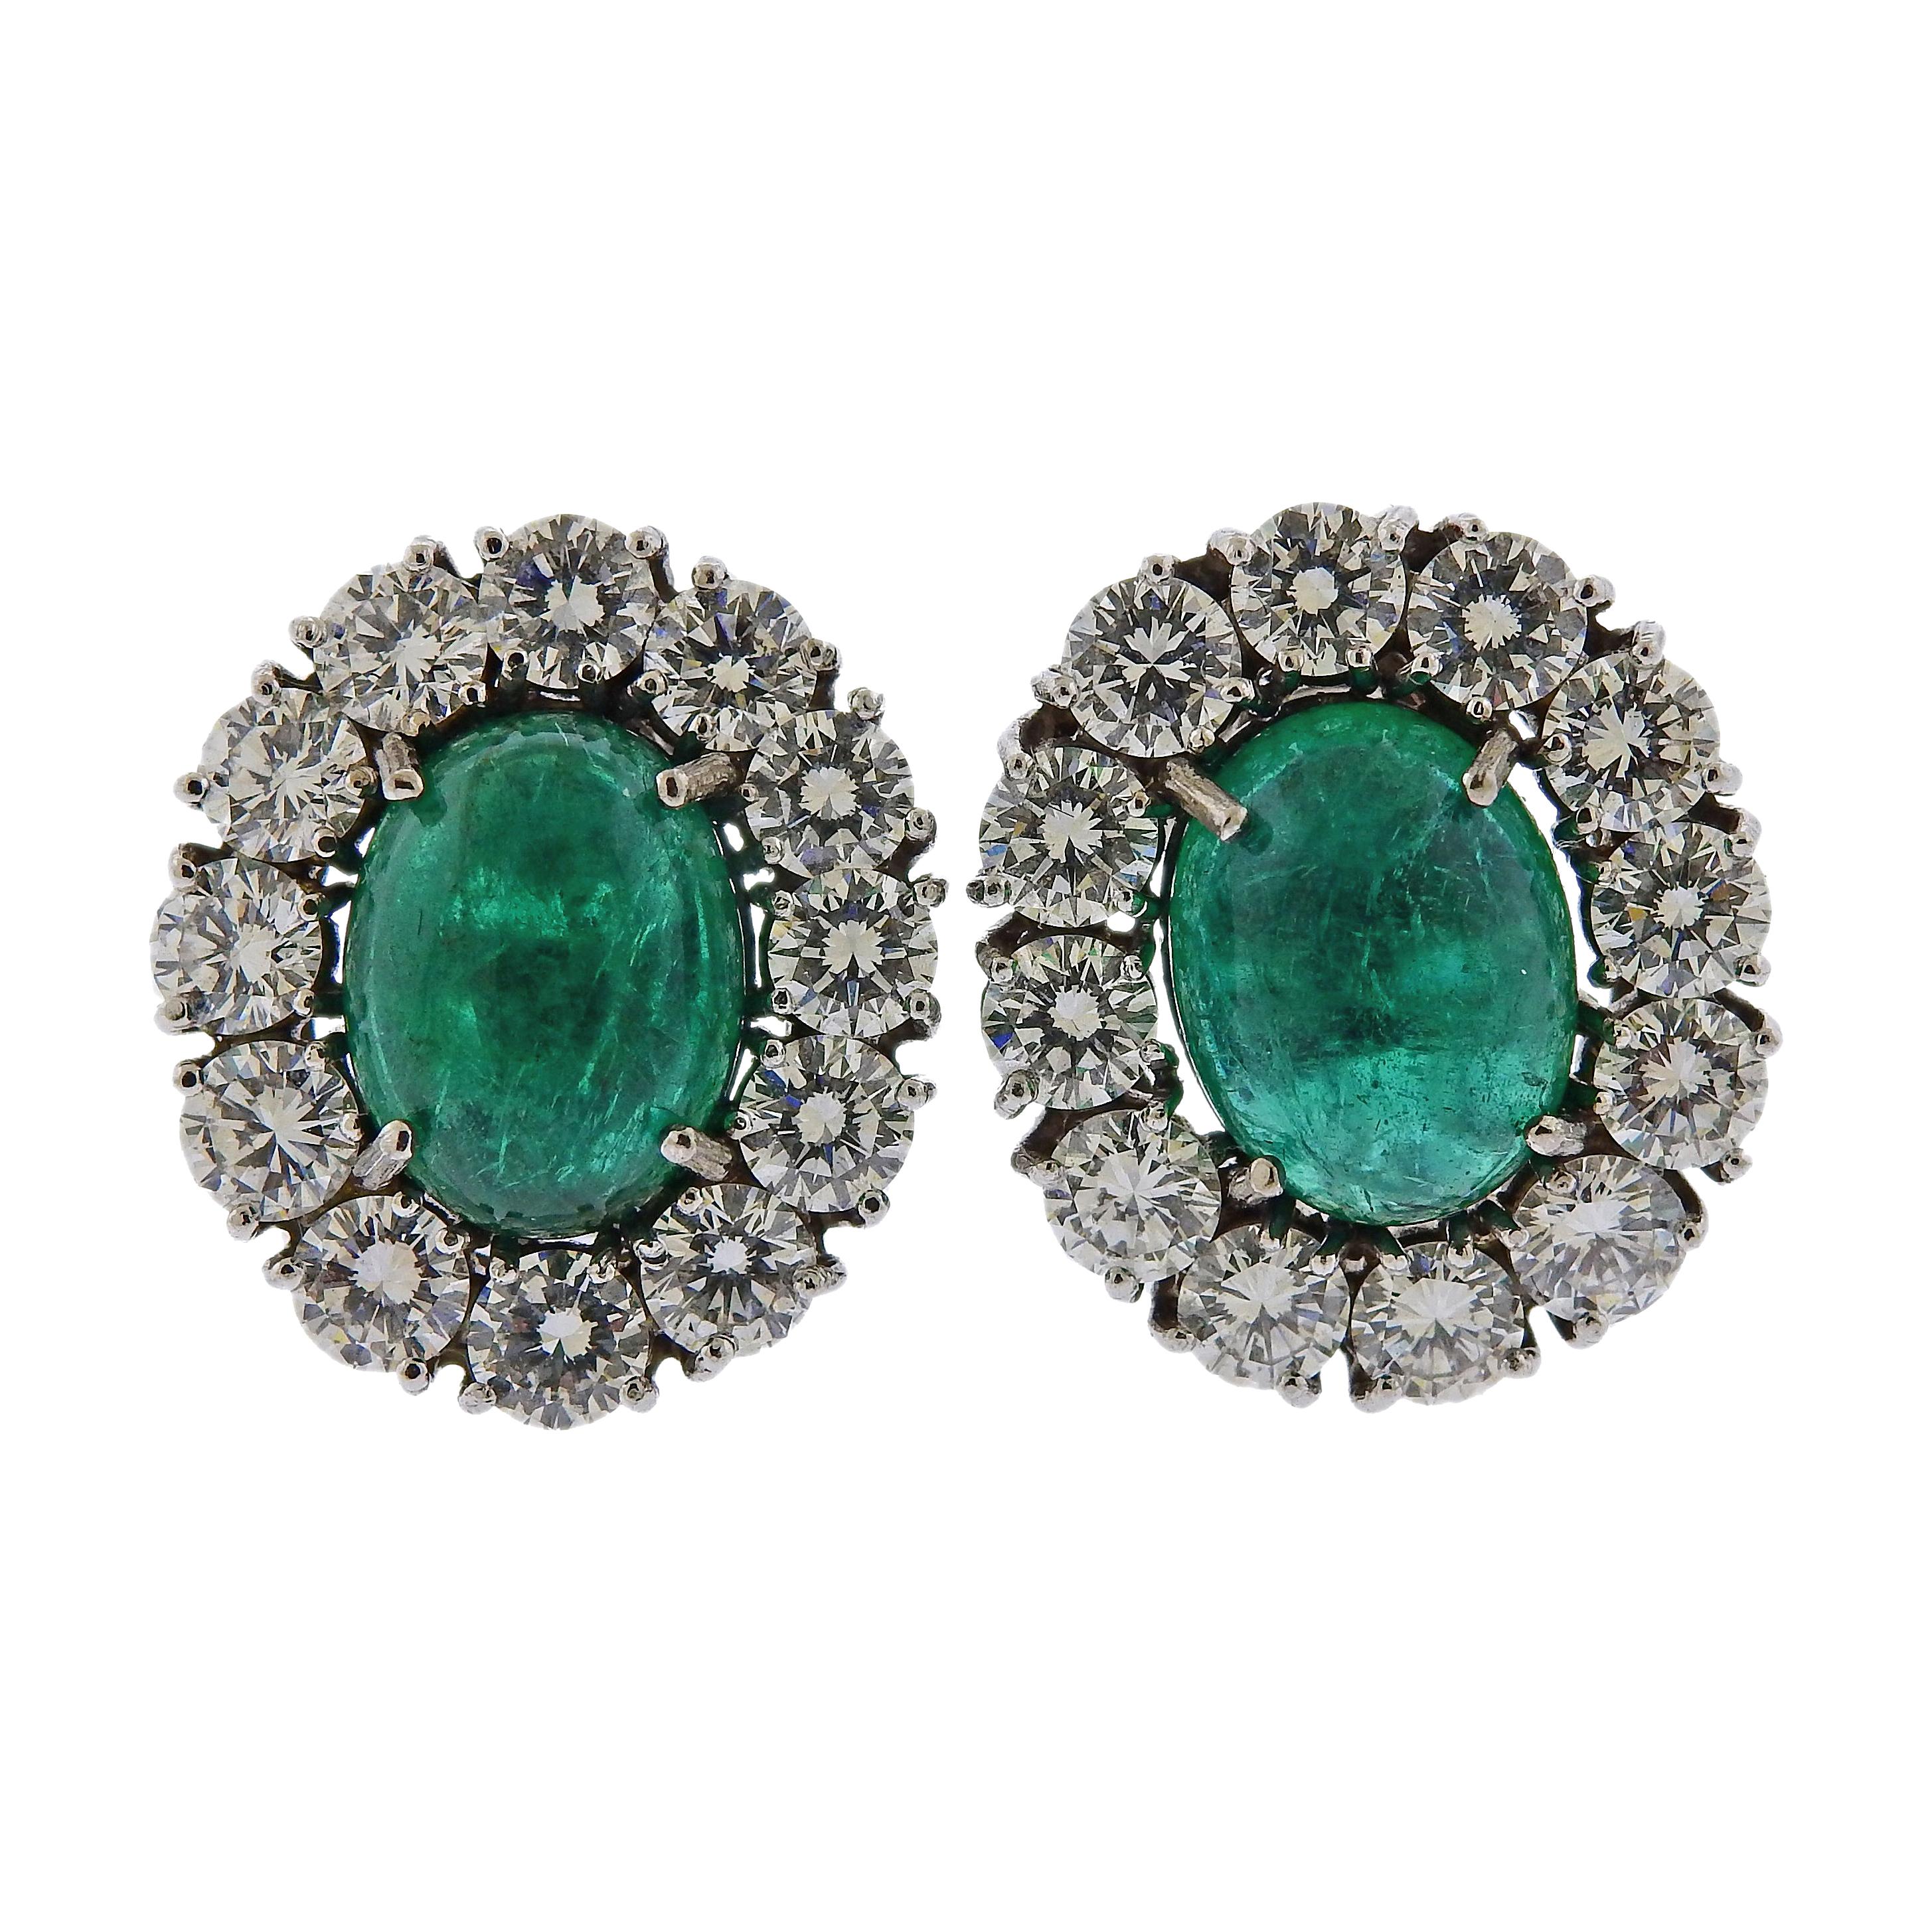 12 Carat Emerald Cabochon Diamond Gold Cocktail Earrings For Sale